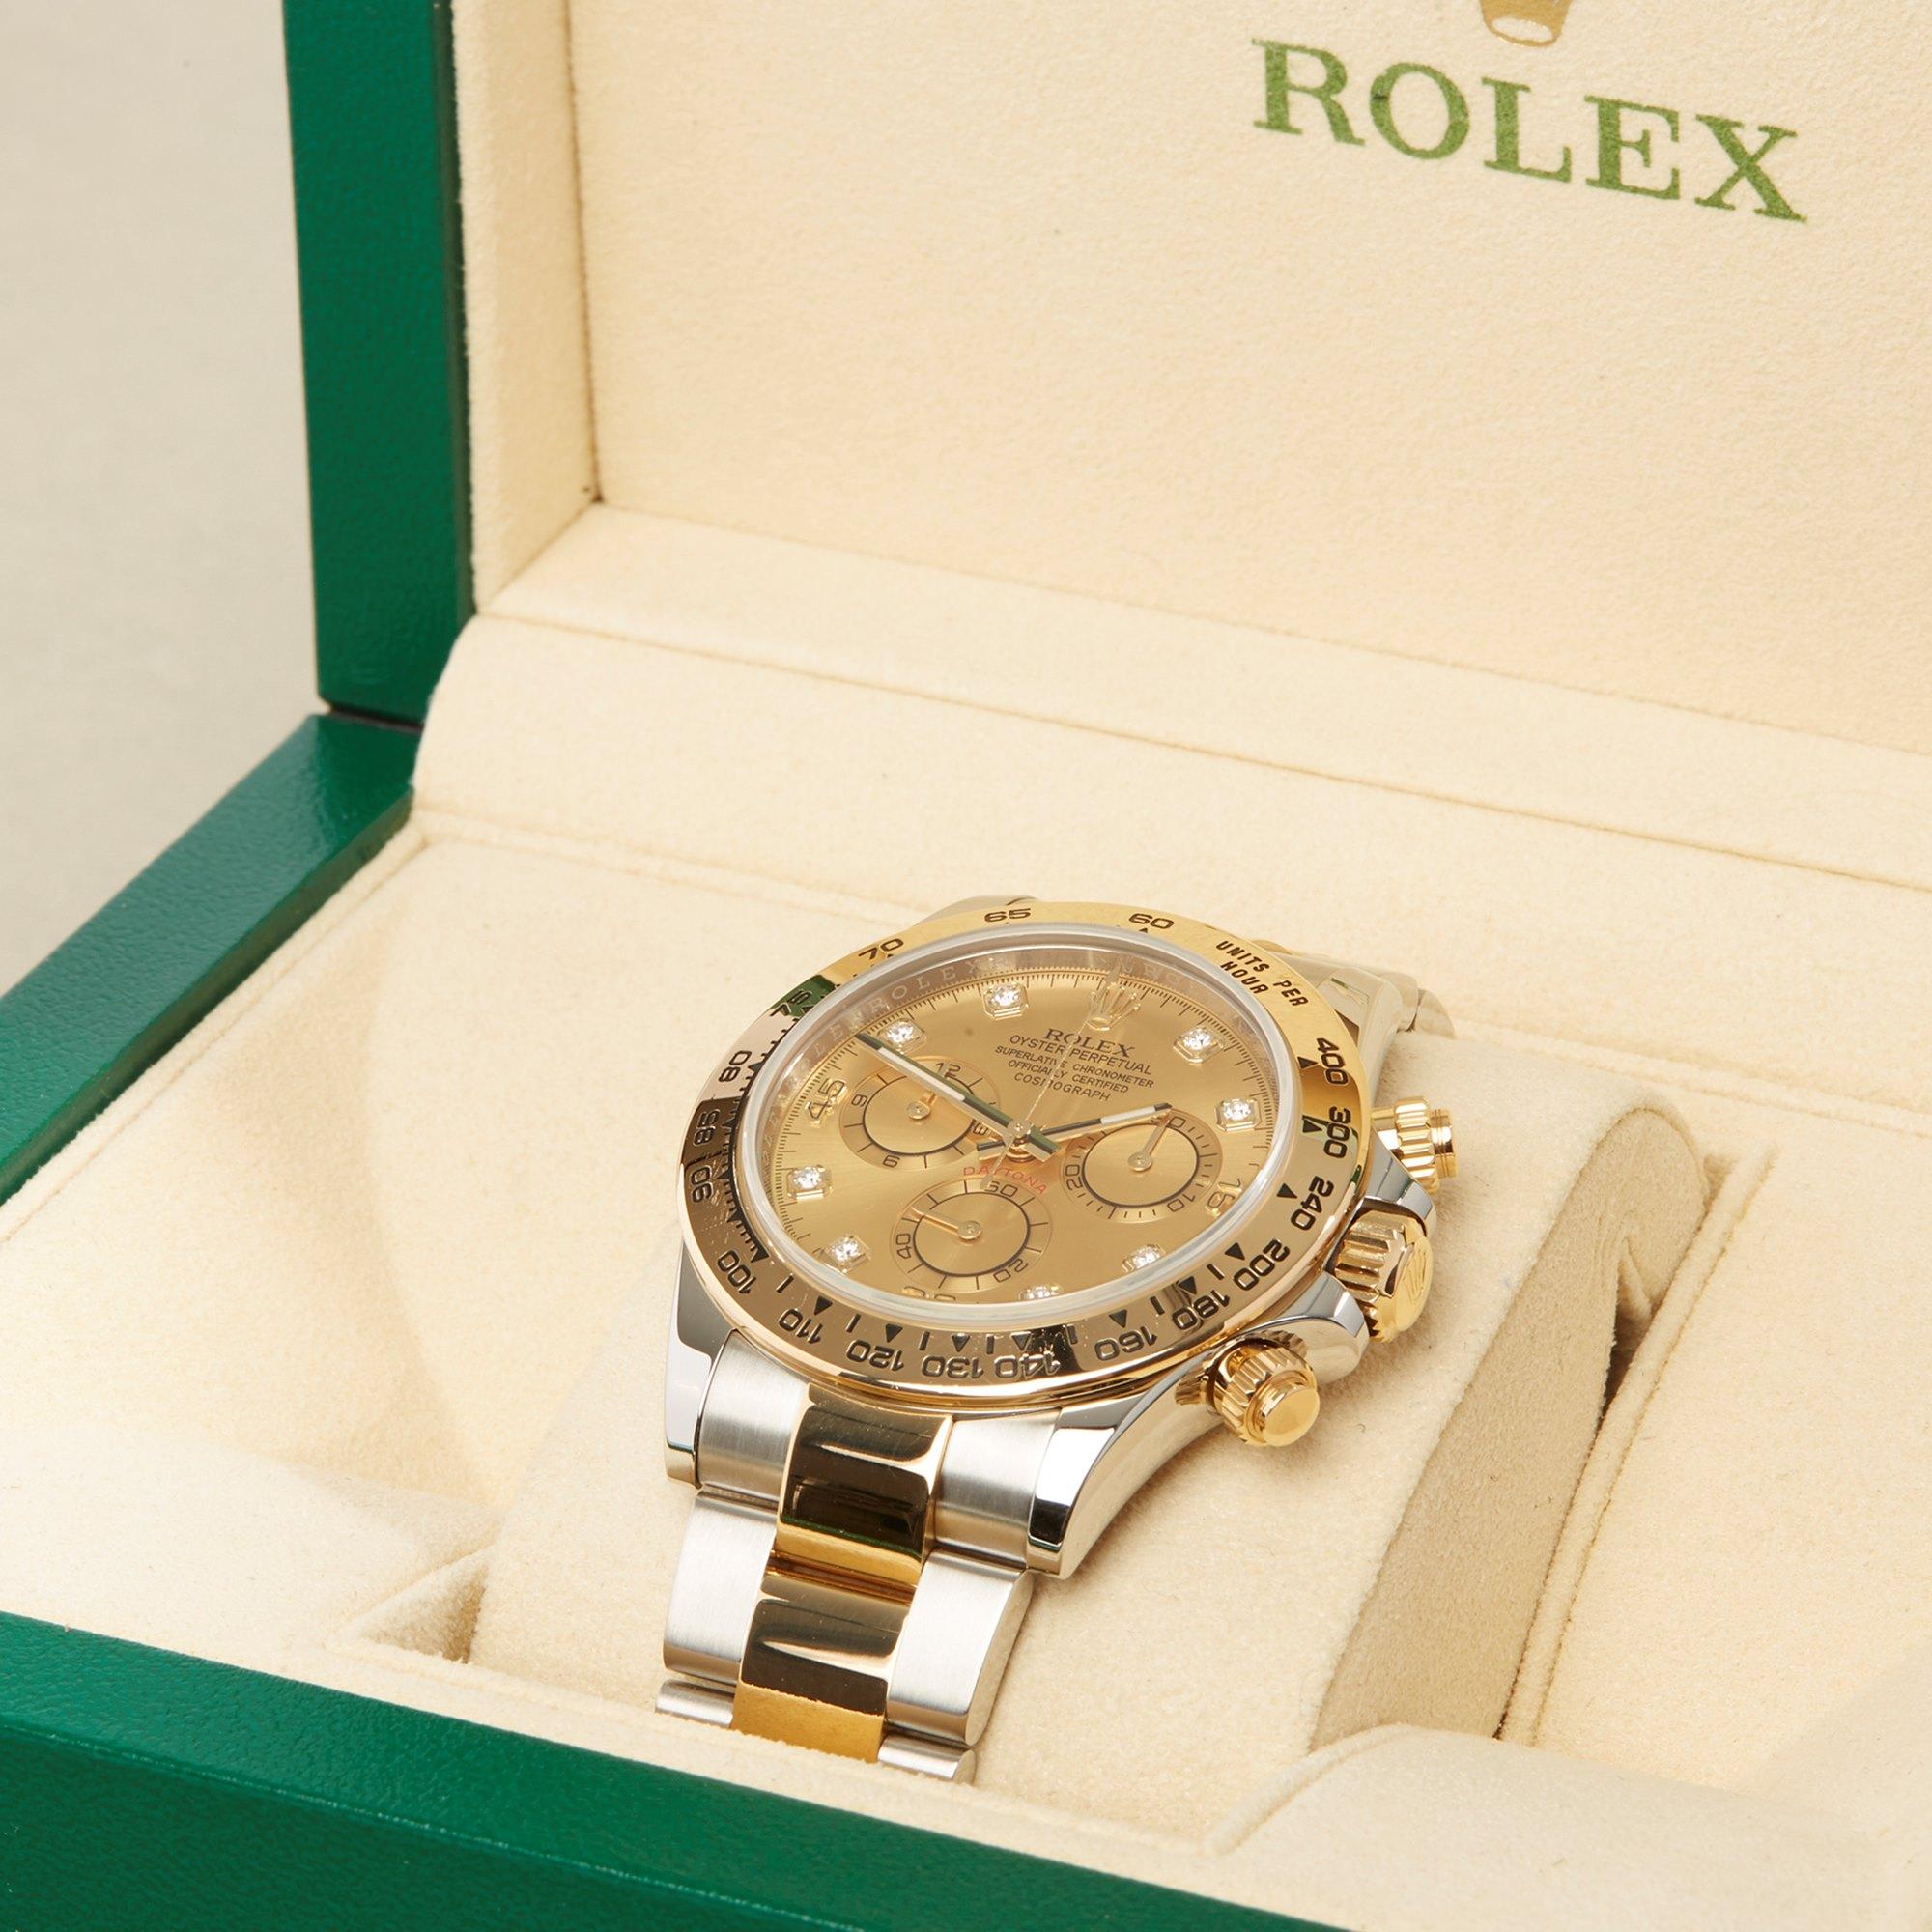 Rolex Daytona 0 116503 Men's Stainless Steel and Yellow Gold Watch 3